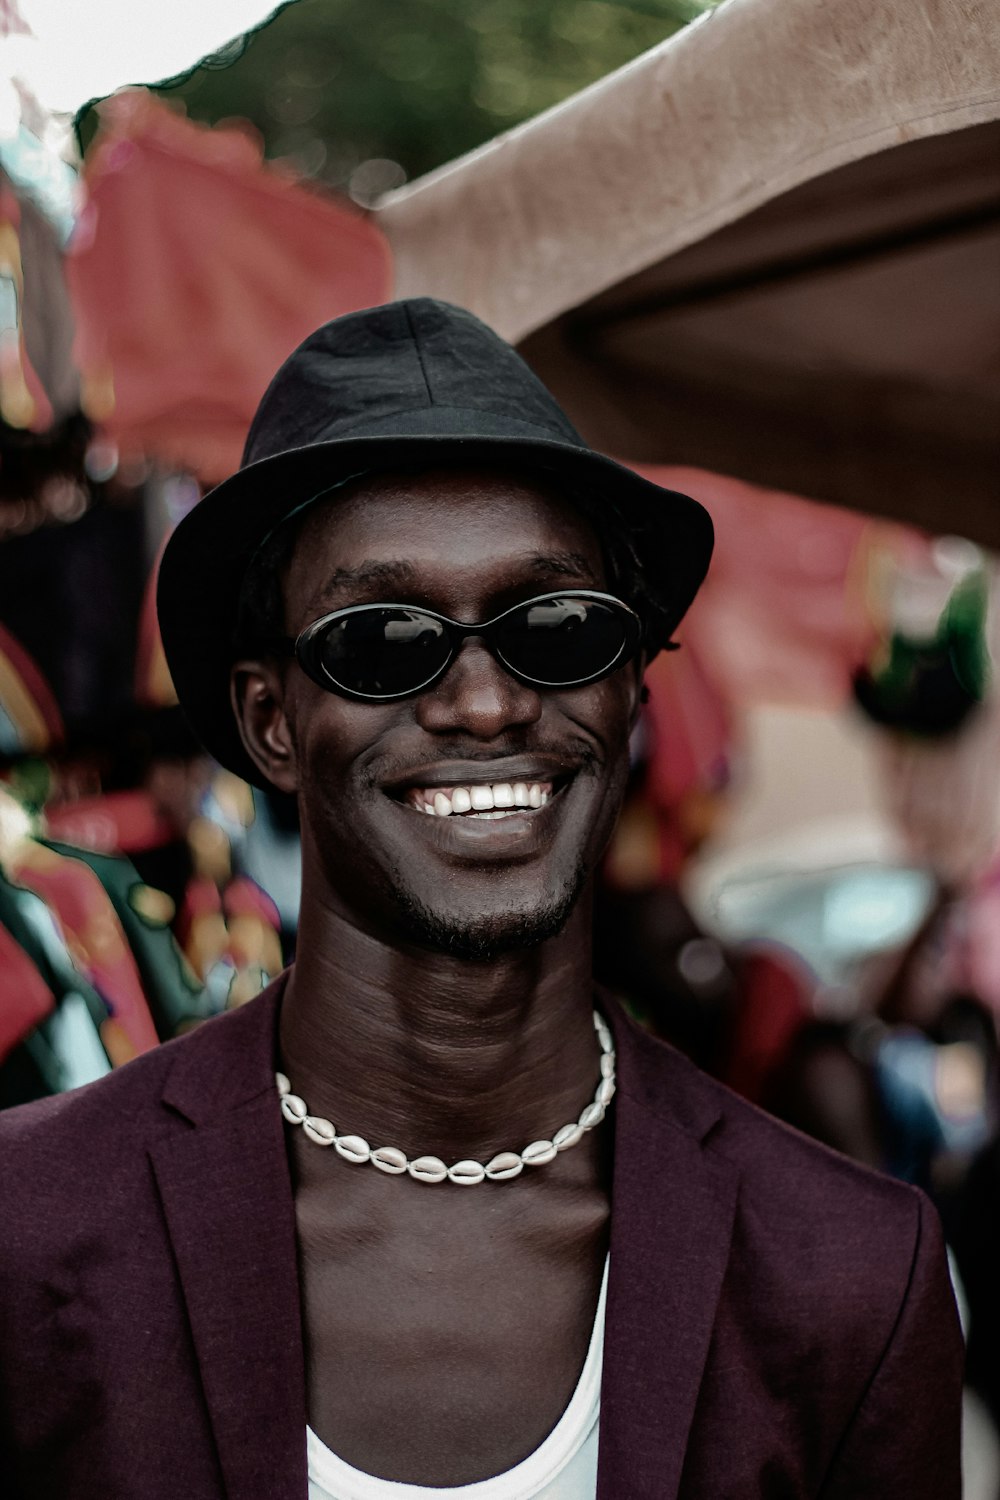 a man in a hat and sunglasses smiles at the camera